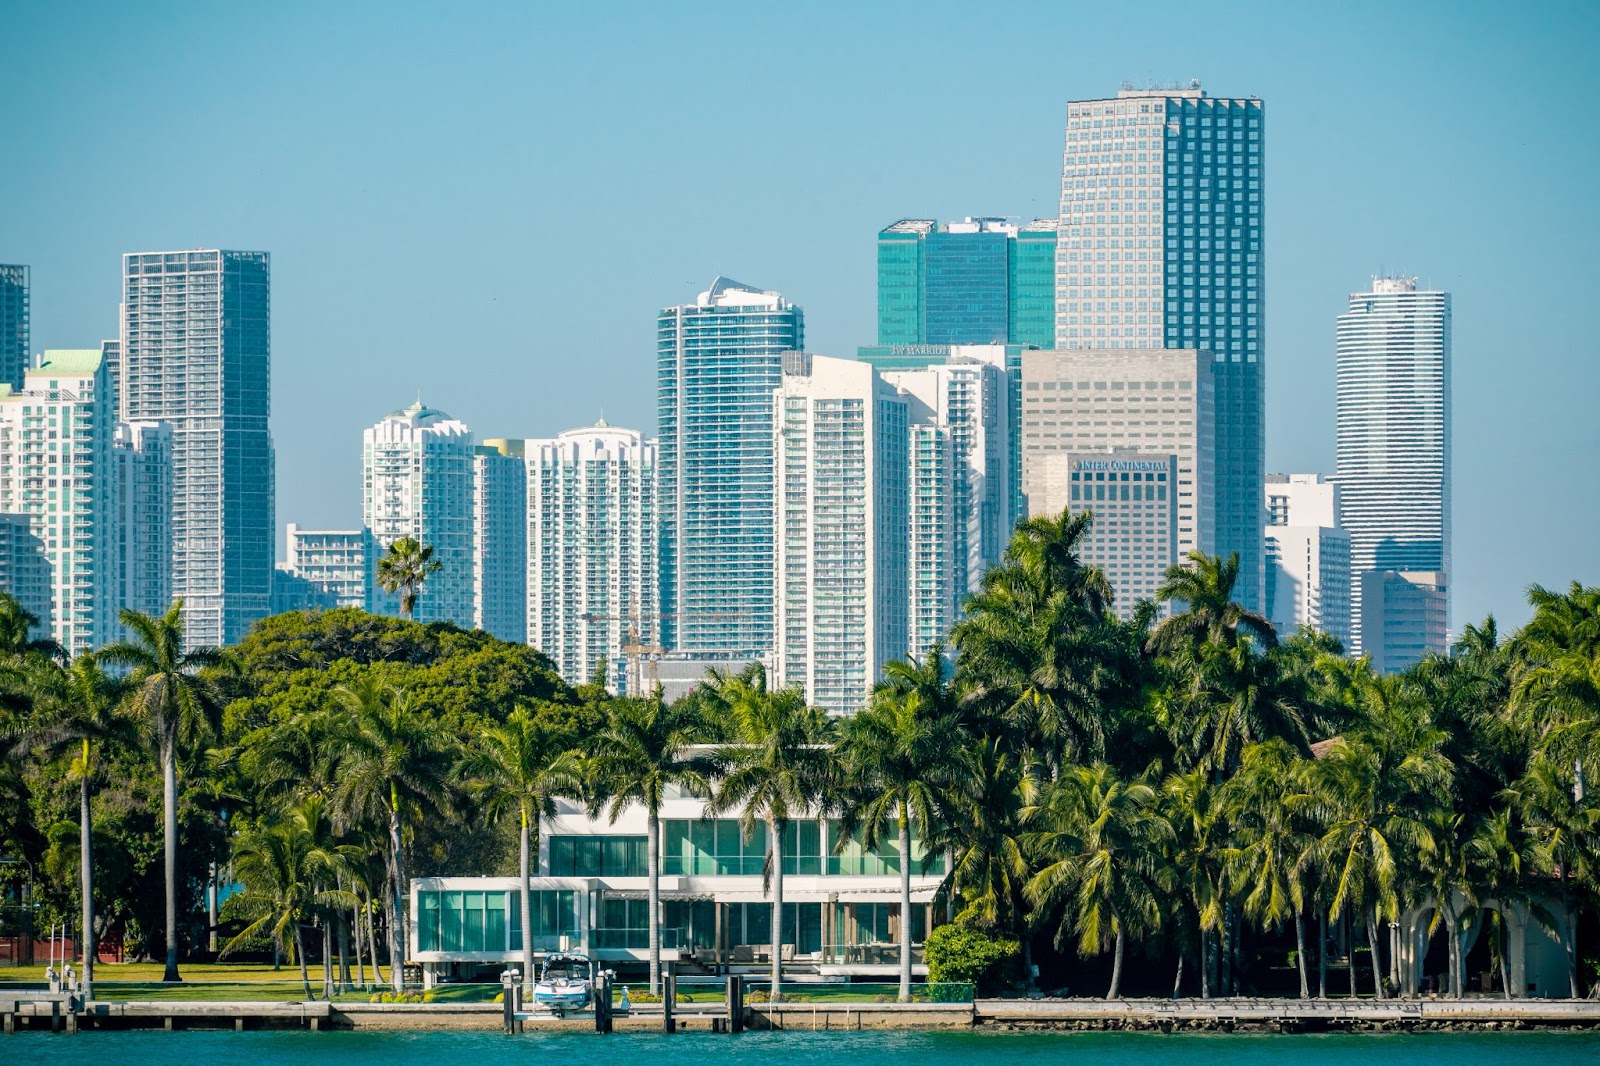 View of the city of Miami, Florida